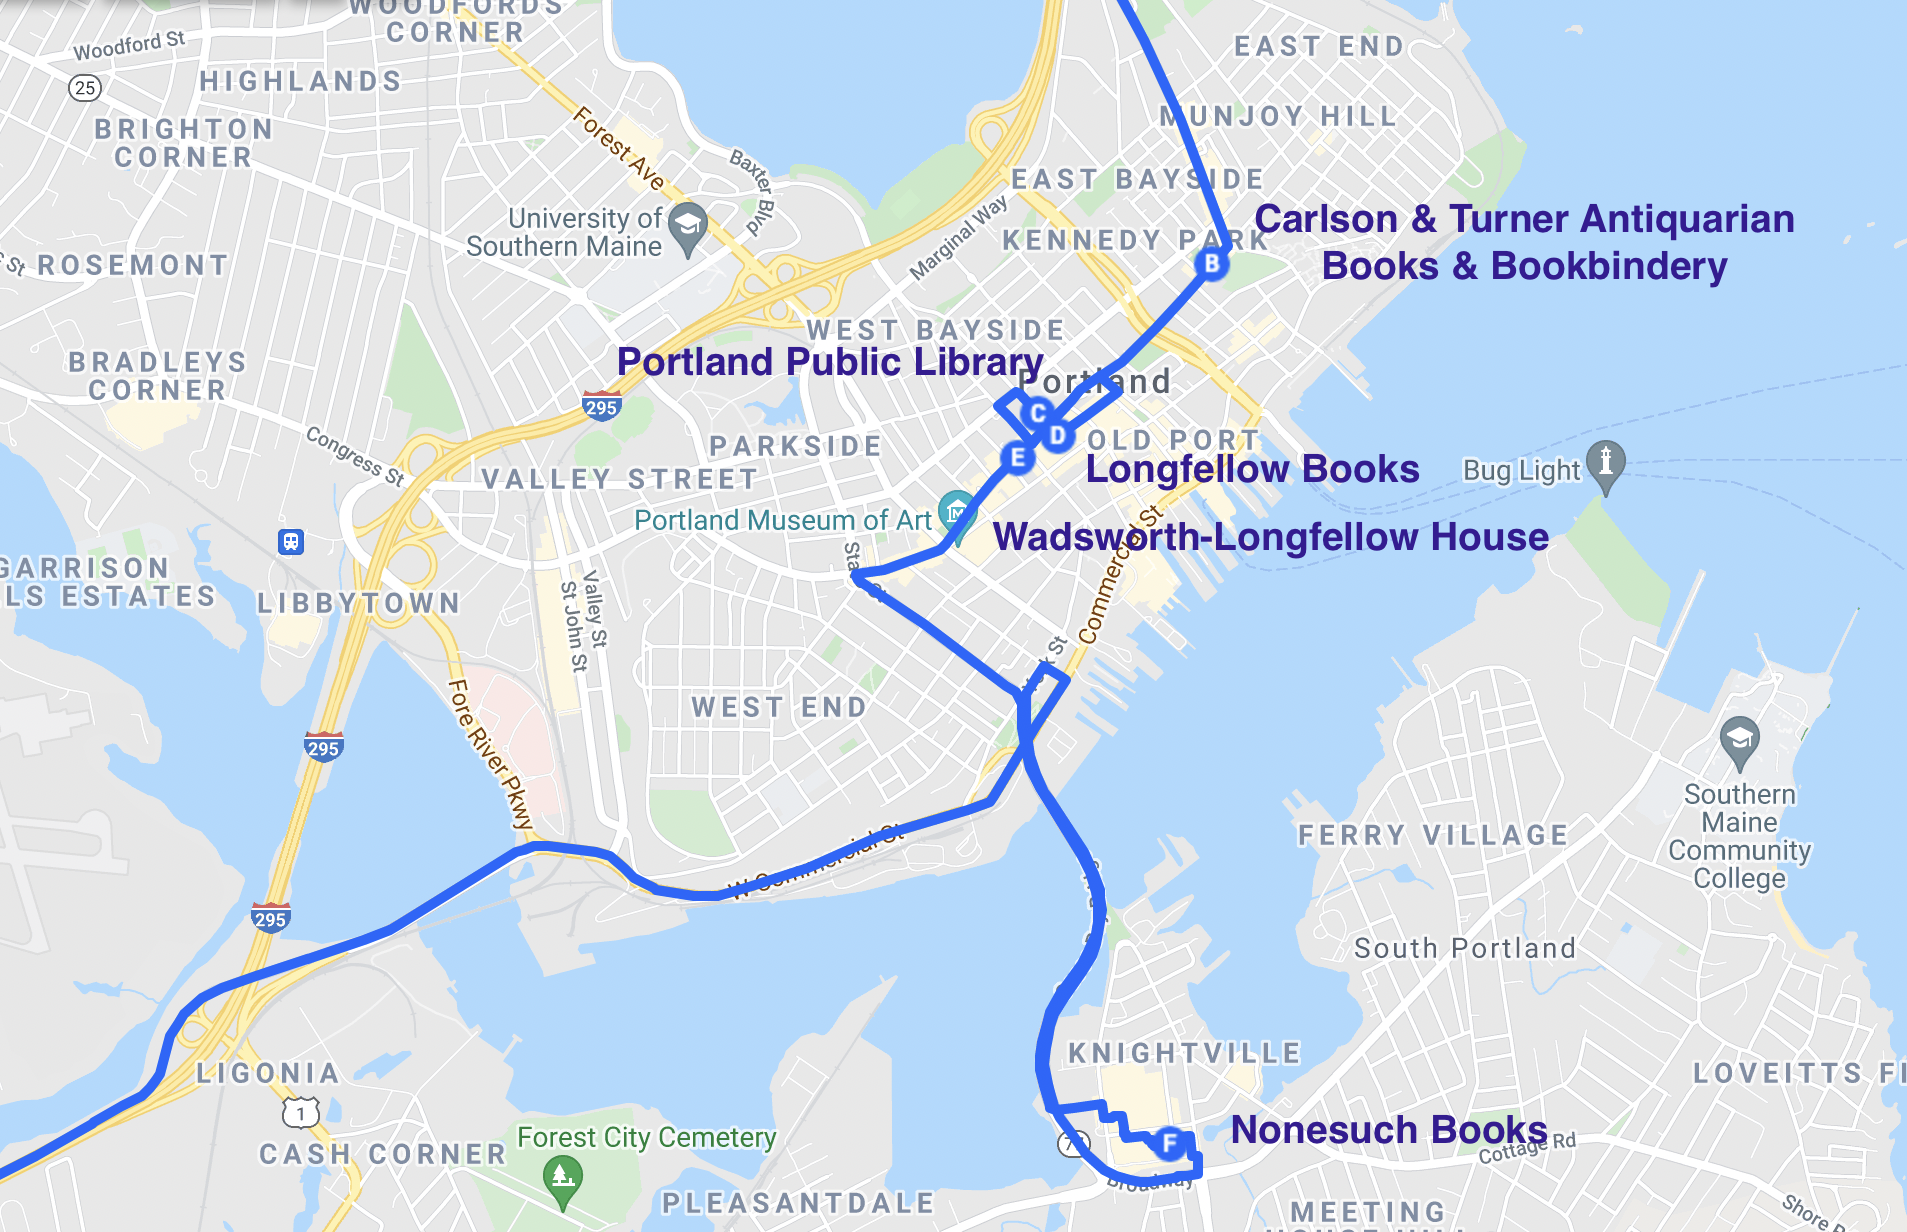 map of literary spots in portland maine